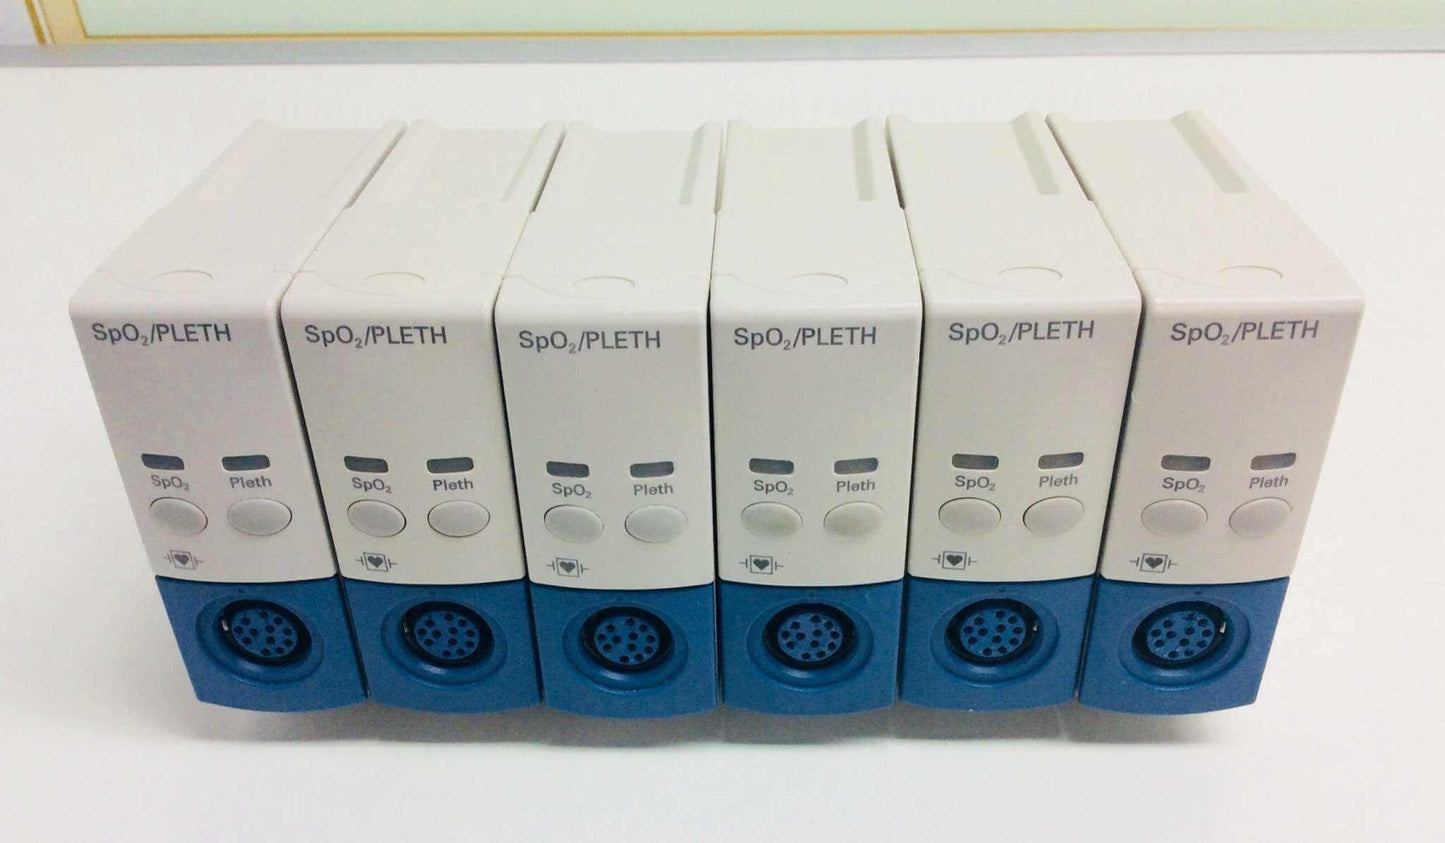 Lot of 6 USED Philips Medizin Systeme SpO2 PLETH Pulse Oximetry Modules M1020A - MBR Medicals